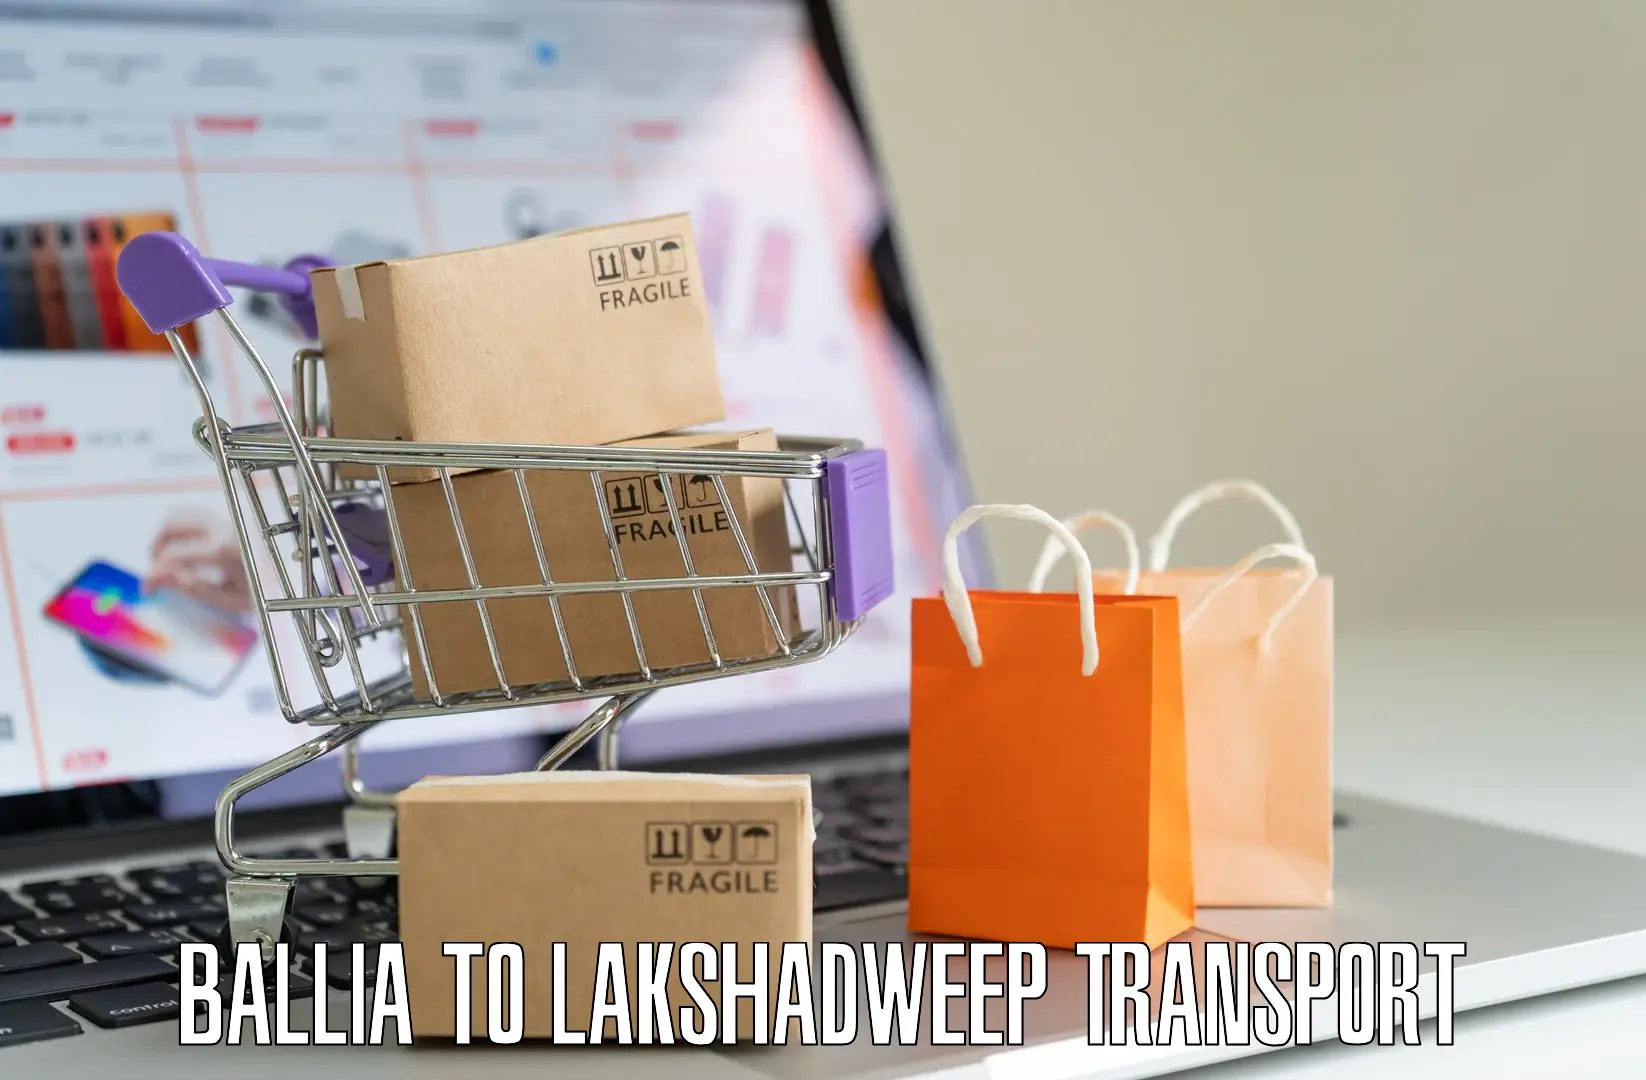 Commercial transport service Ballia to Lakshadweep